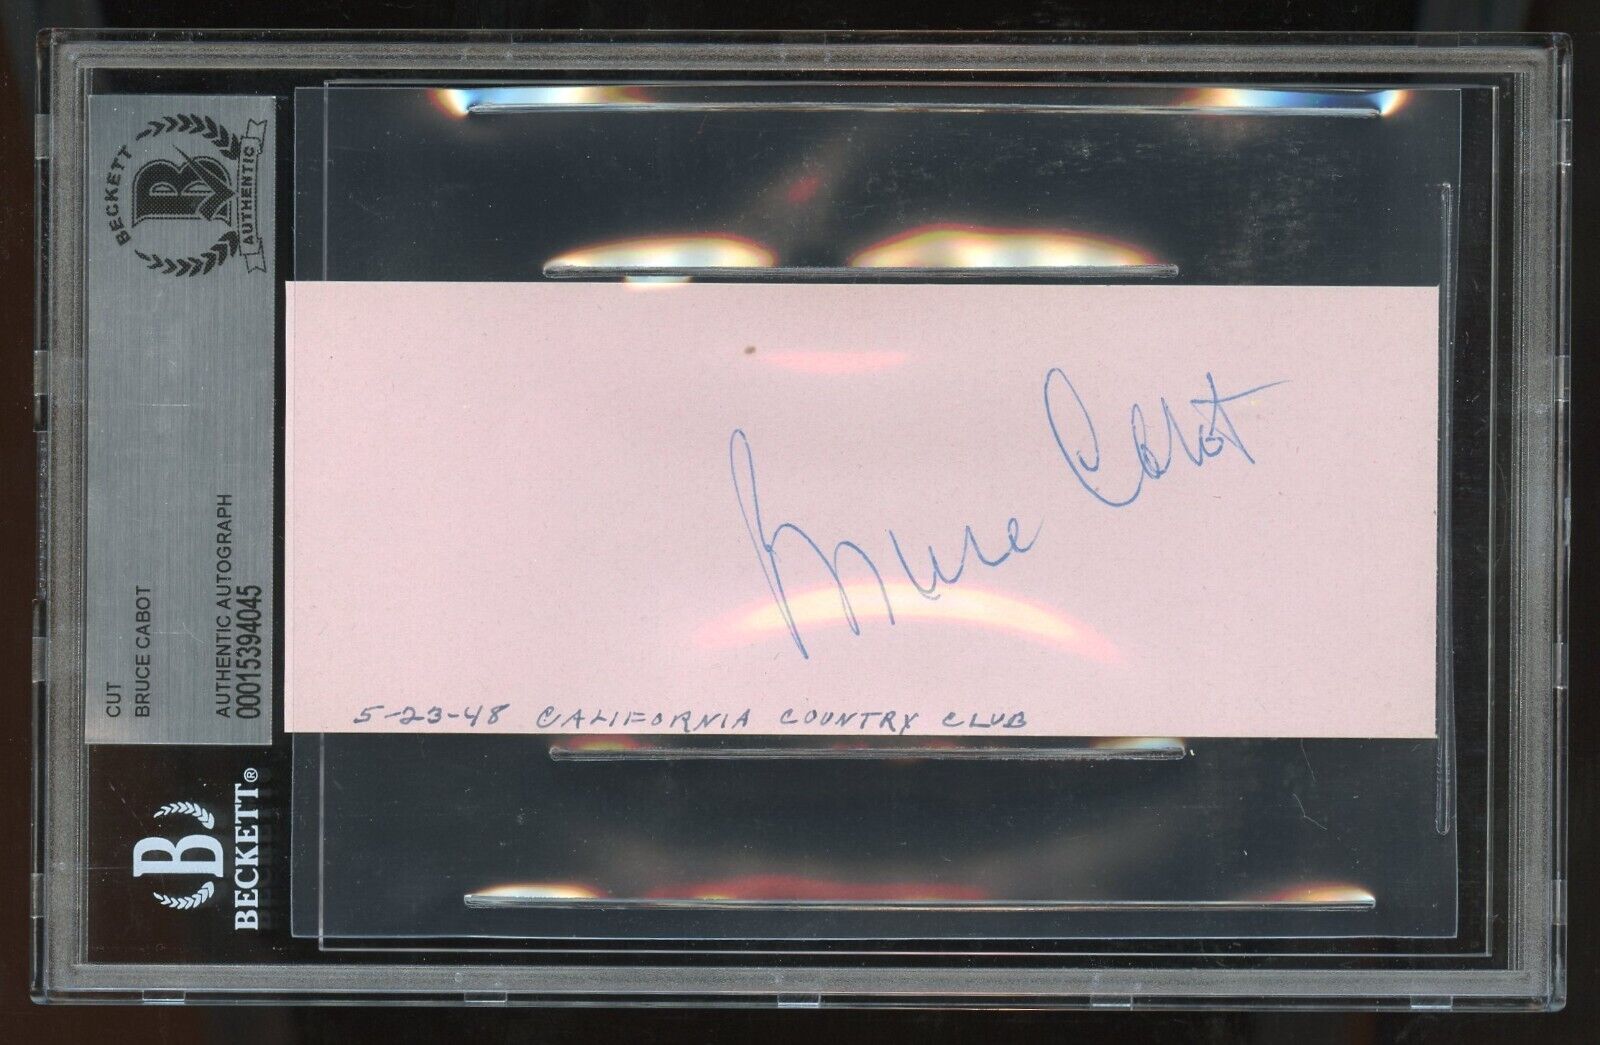 Bruce Cabot signed 2x5 cut autograph on 5-23-48 at California Country Club BAS